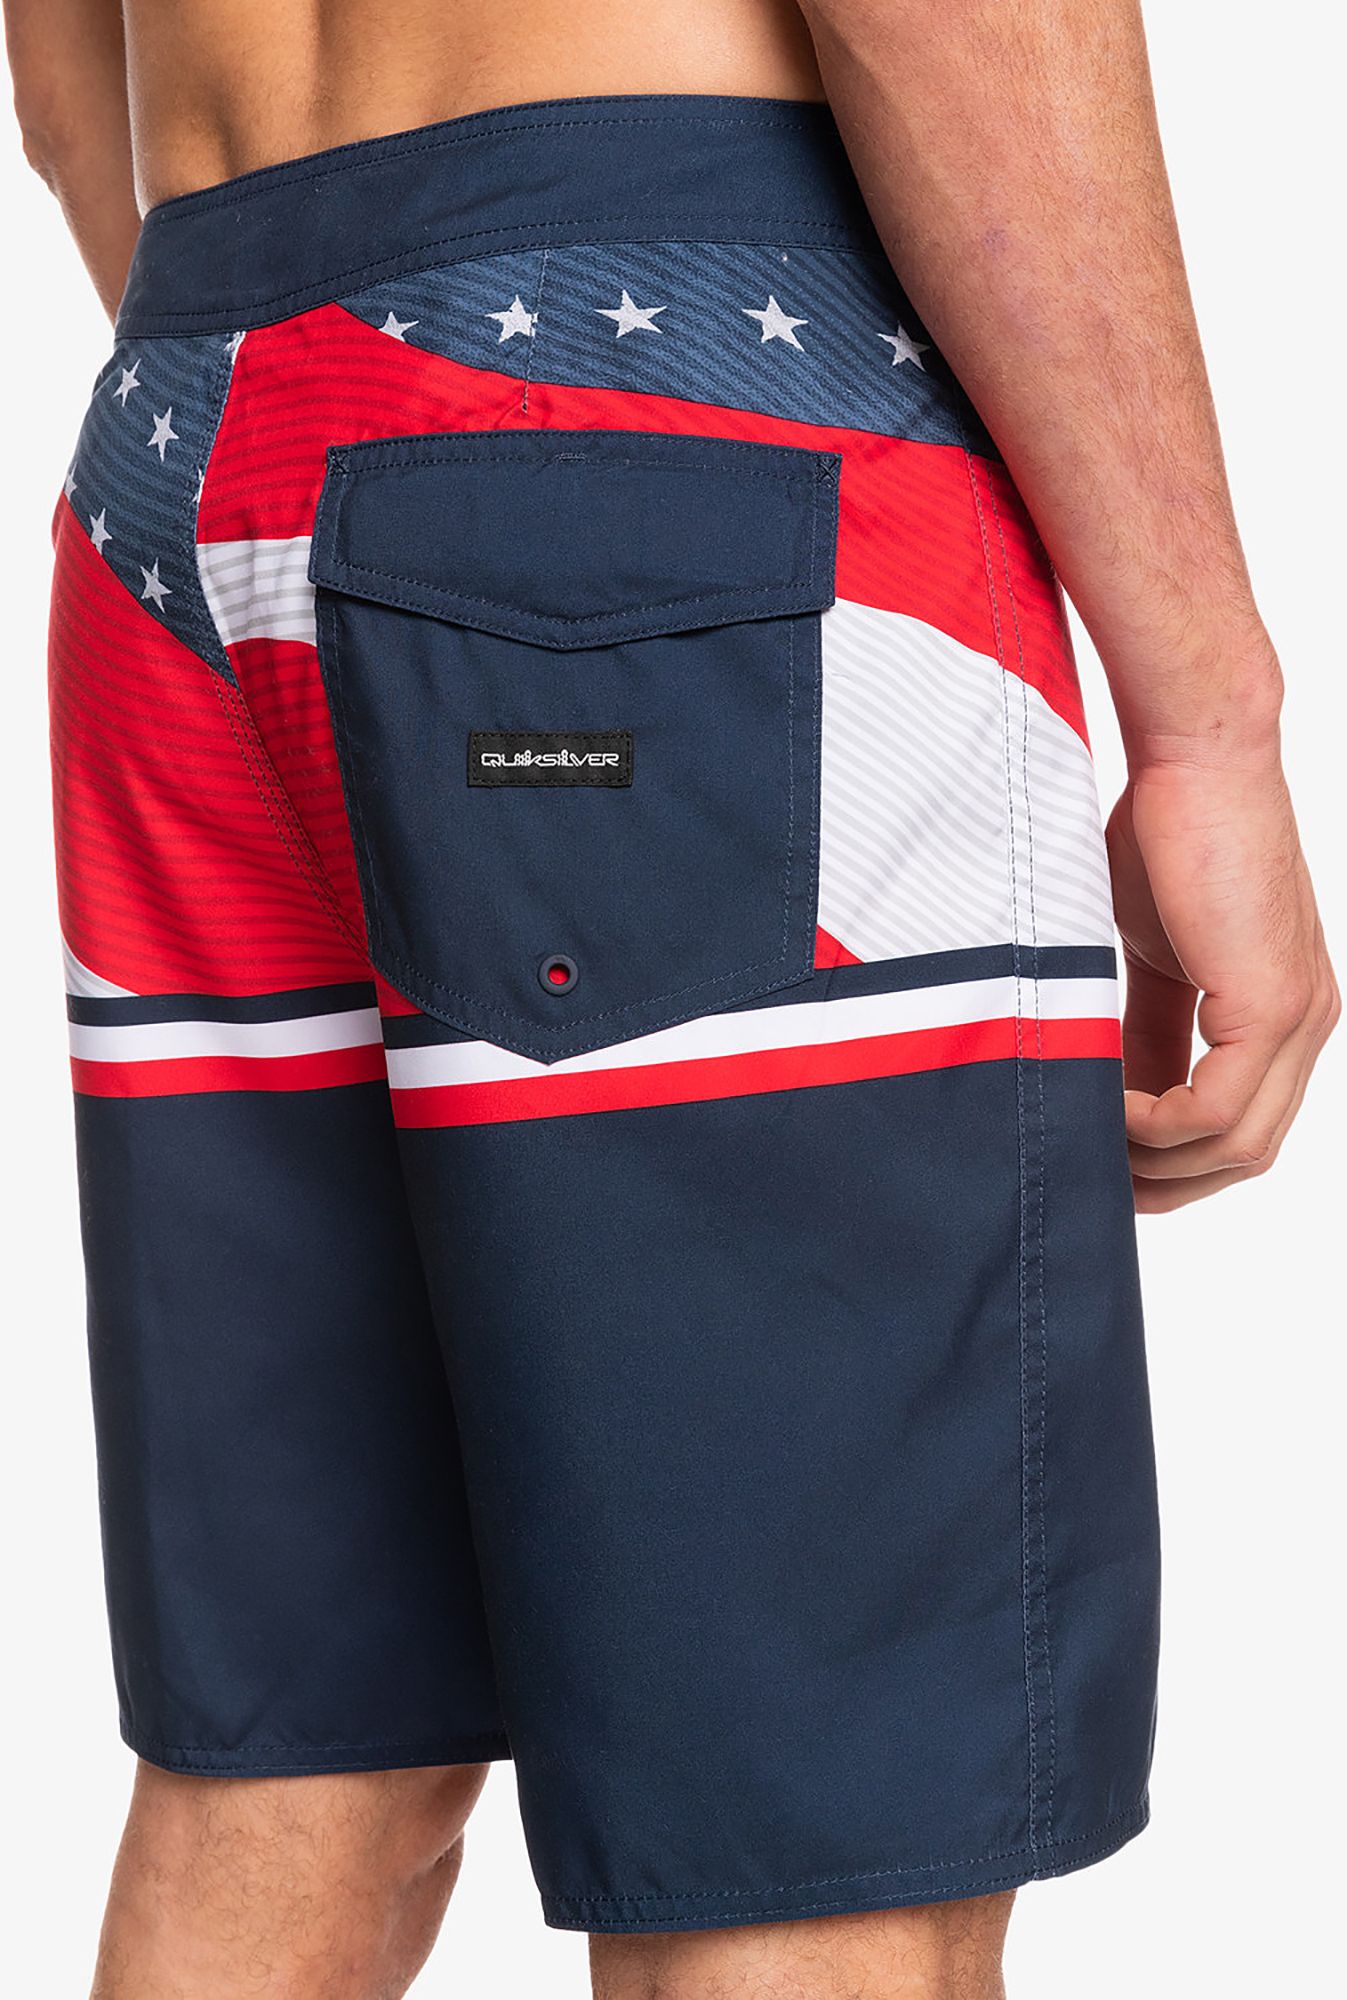 Quiksilver Men's Everyday USA 20” Board Shorts